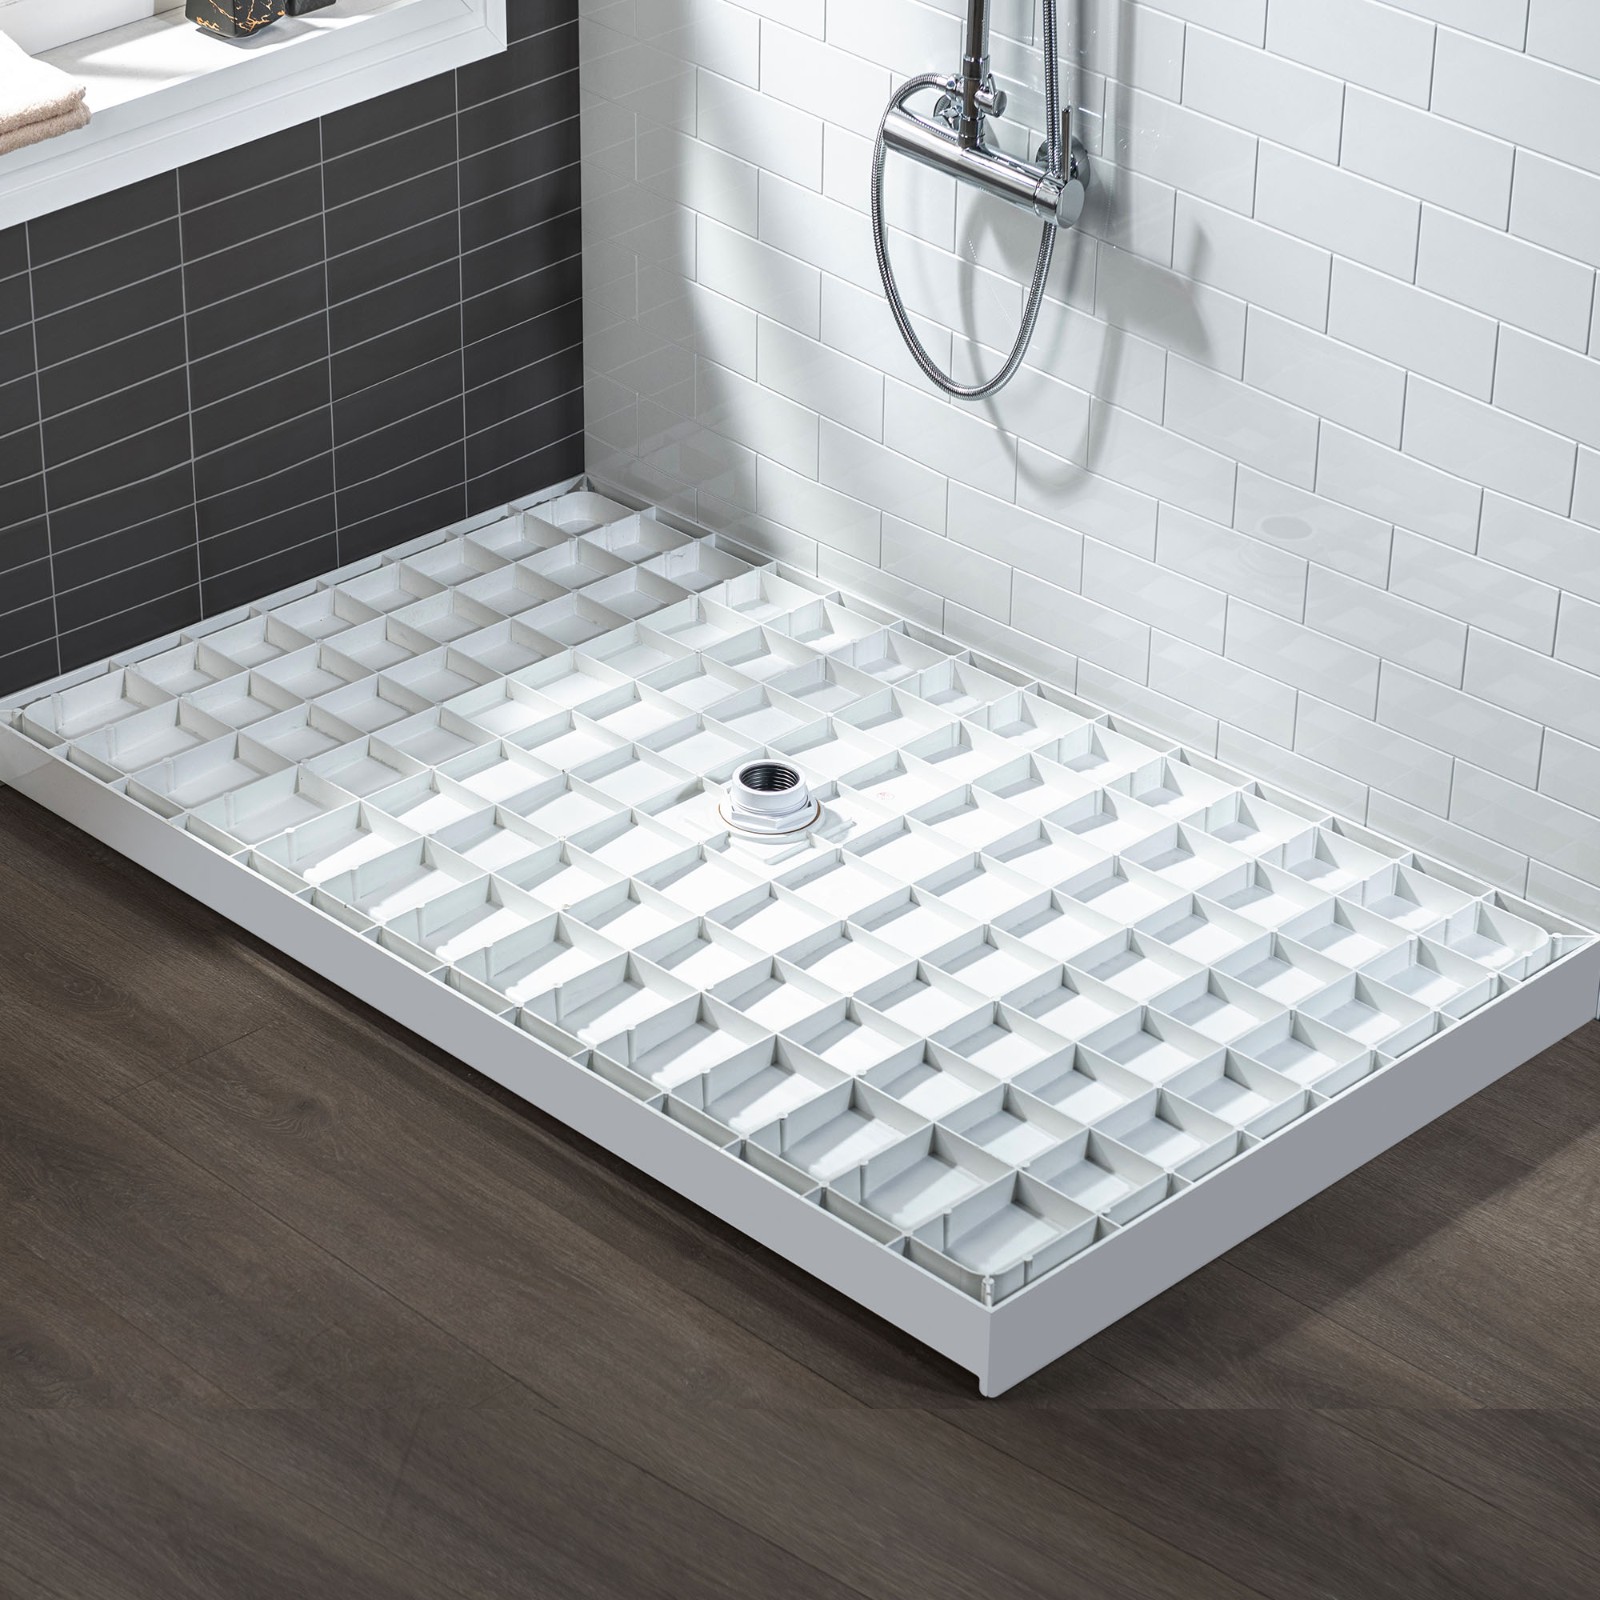  WOODBRIDGE SBR6032-1000C-CH SolidSurface Shower Base with Recessed Trench Side Including  Chrome Linear Cover, 60